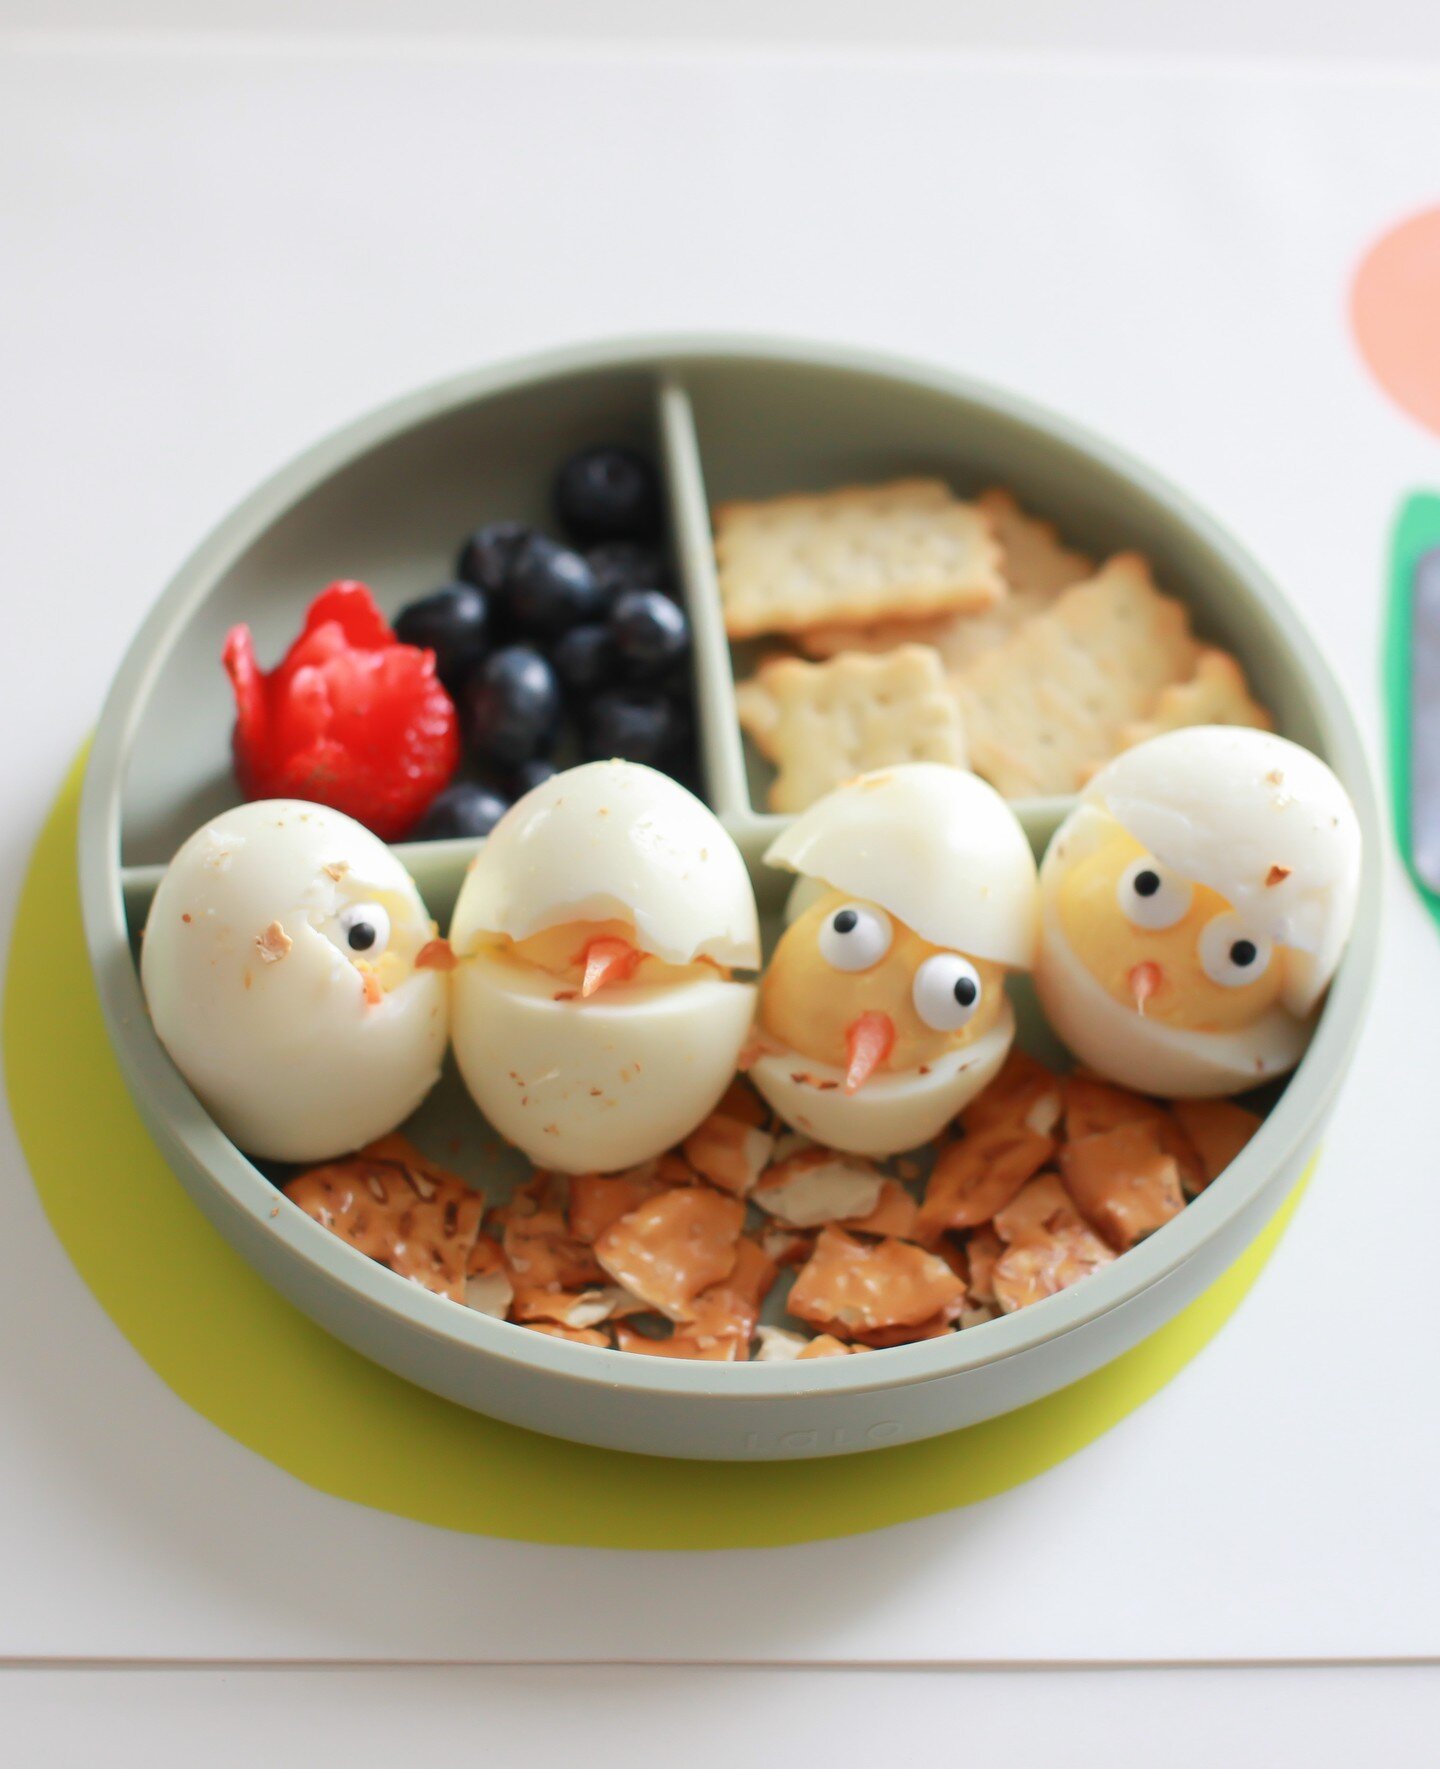 🐥 Consider this your monthly reminder to have FUN with your food! If you&rsquo;re looking for an exciting way to create lunchtime magic, try this fun version using our hard-boiled eggs!